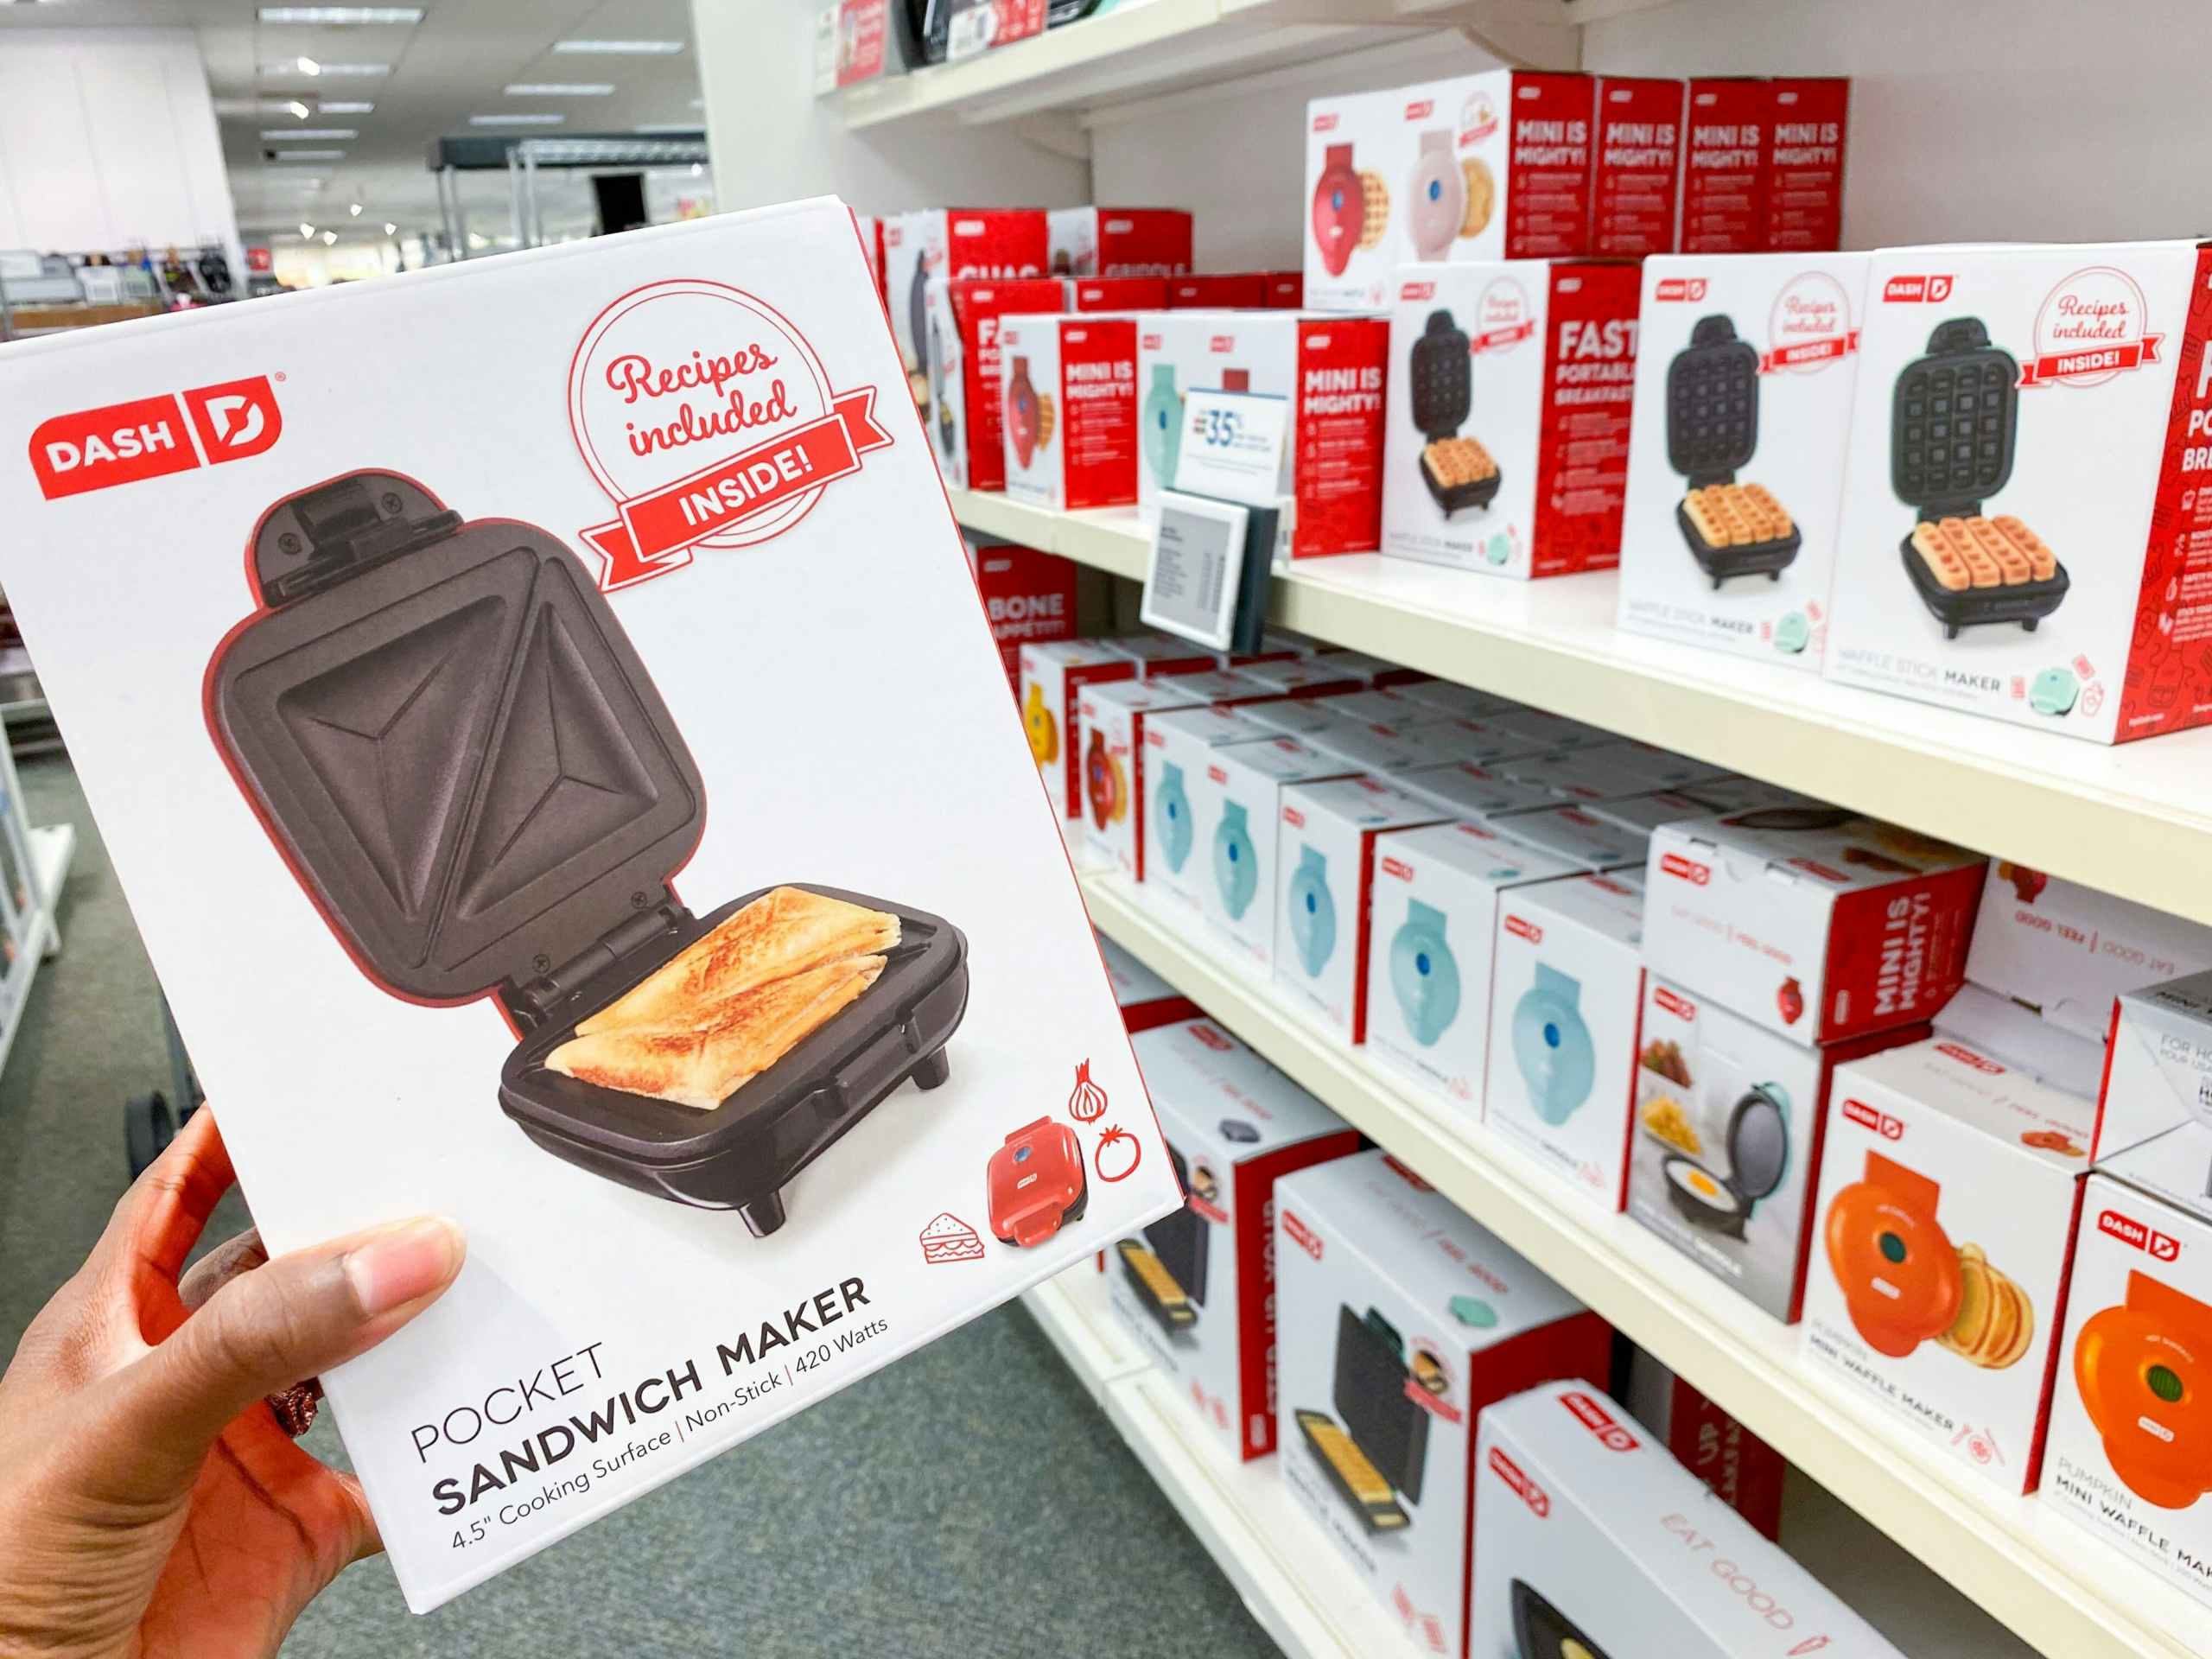 dash mini pocket sandwich maker with other appliances on the shelves in the background